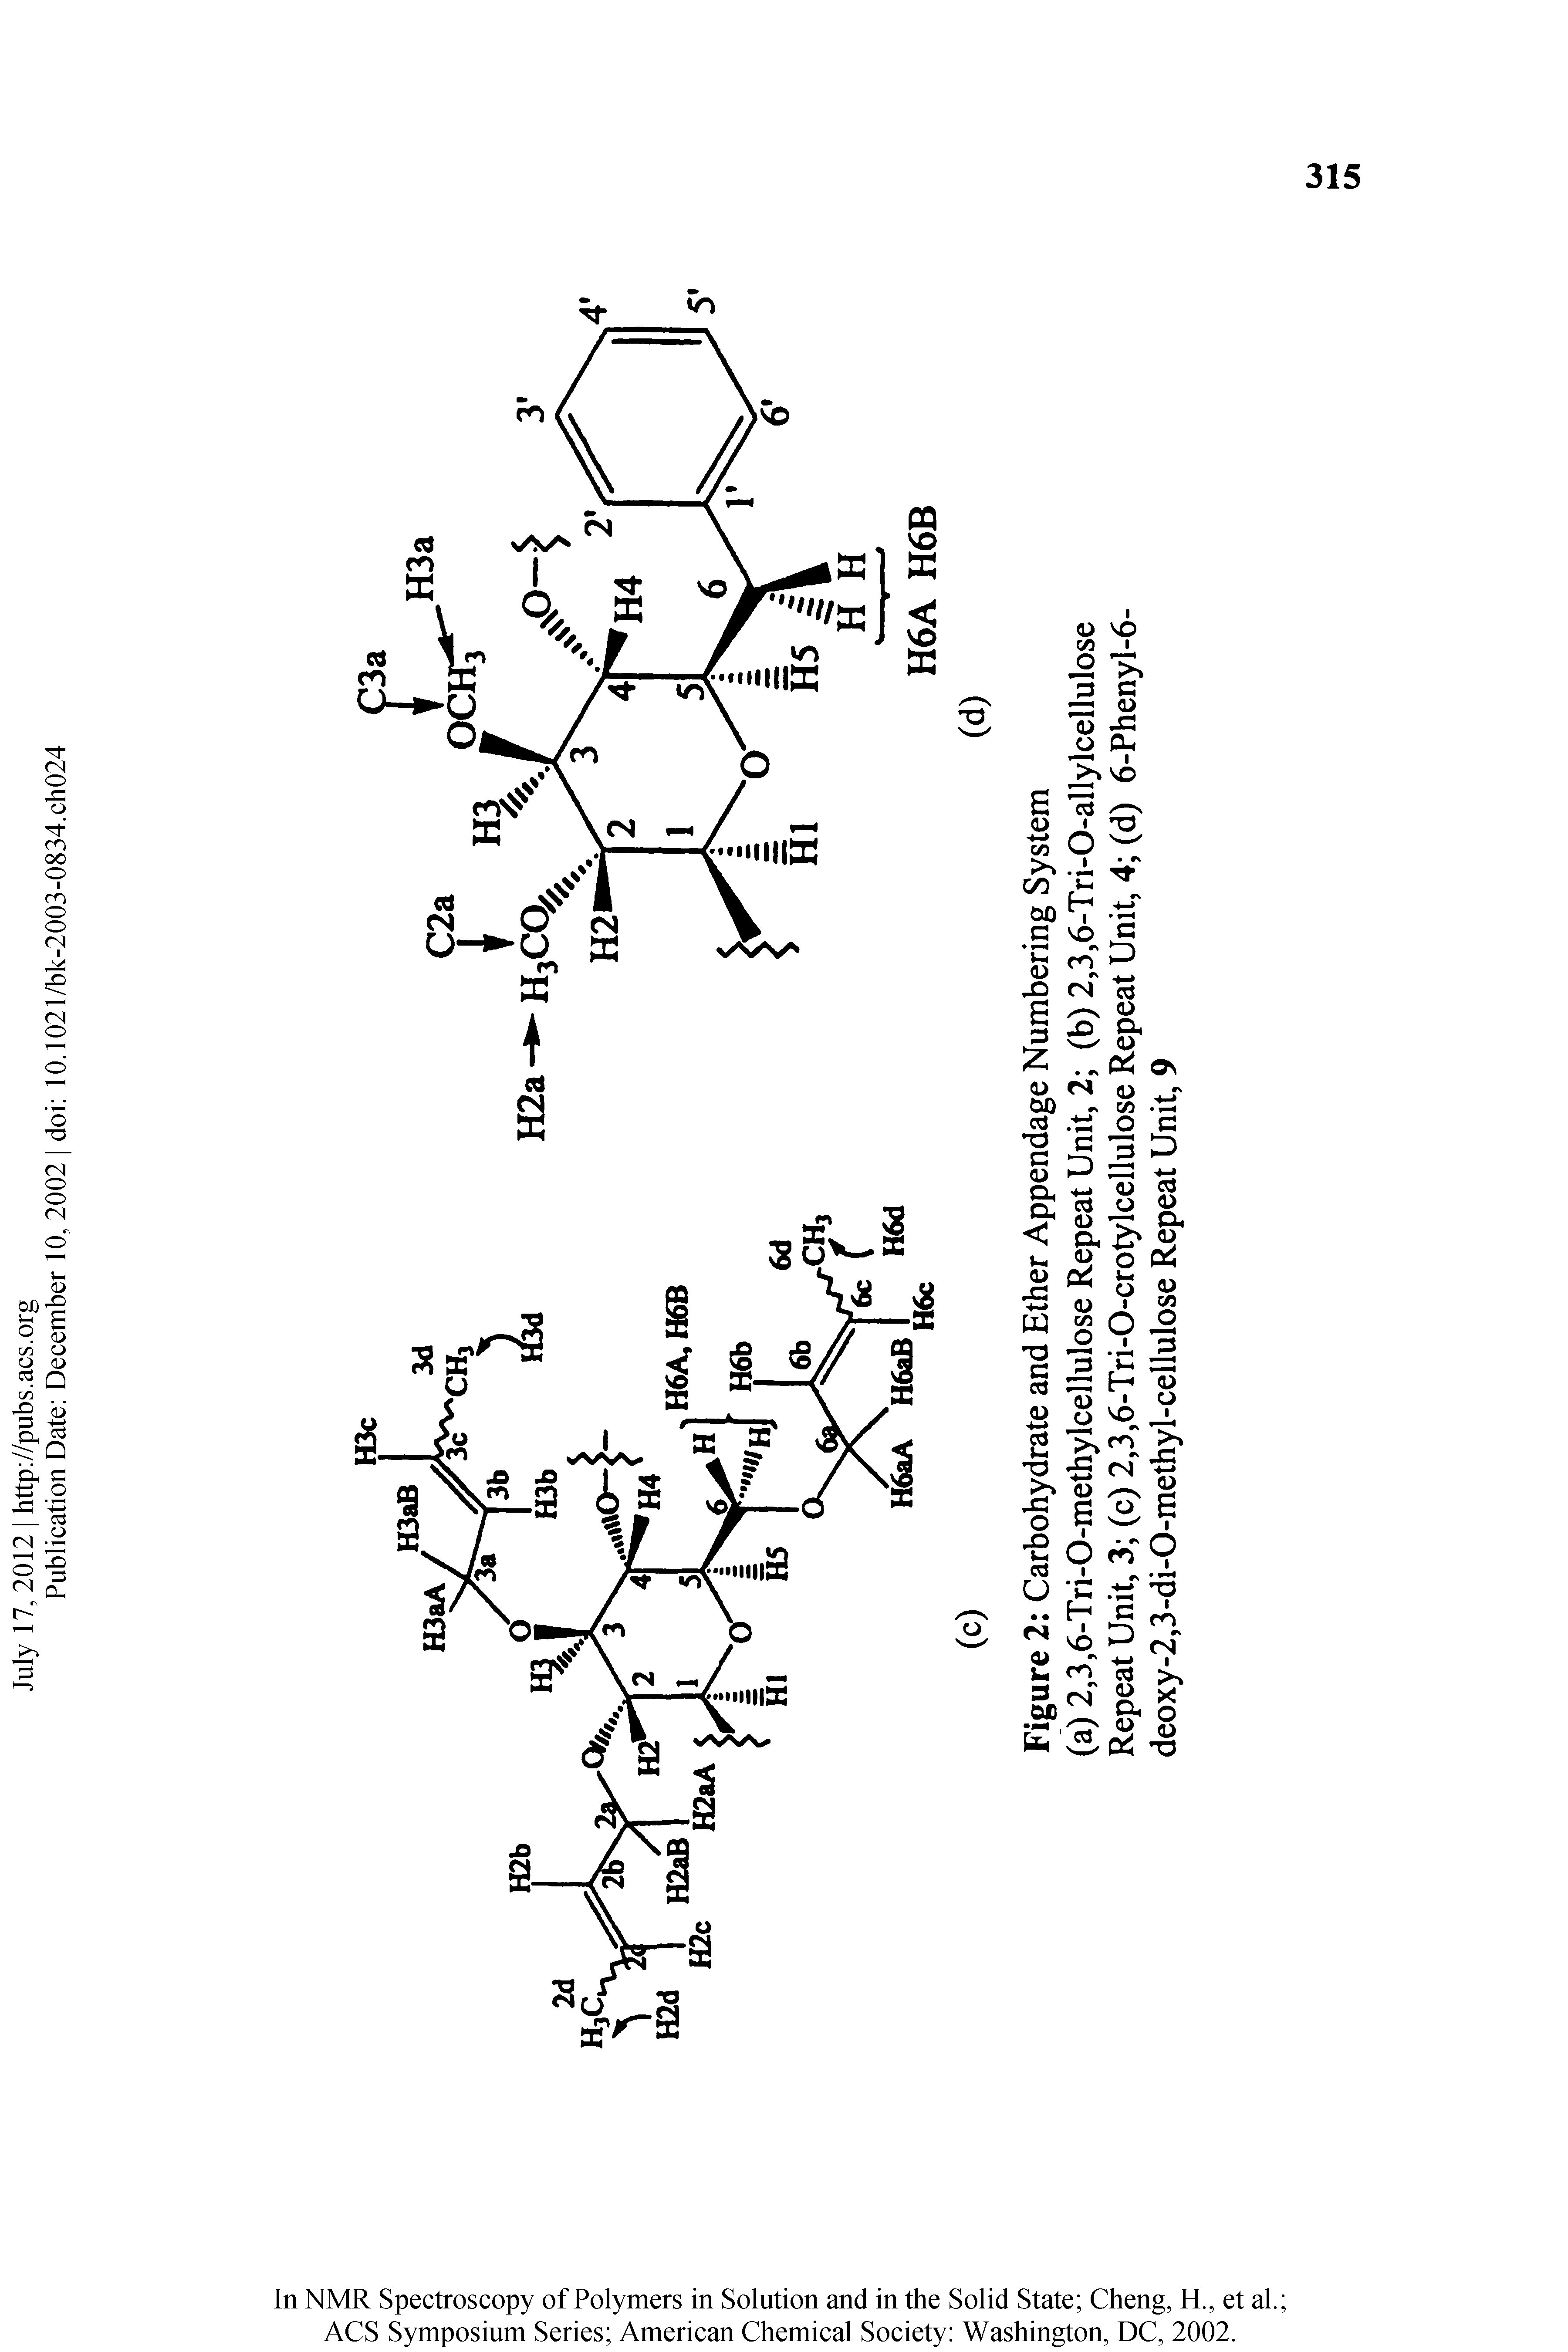 Figure 2 Carbohydrate and Ether Appendage Numbering System (a) 2,3,6-Tri-O-methylcellulose Repeat Unit, 2 (b) 2,3,6-Tri-O-allylcellulose Repeat Unit, 3 (c) 2,3,6-Tri-O-crotylcellulose Repeat Unit, 4 (d) 6-Phenyl-6-deoxy-2,3-di-0-methyl-cellulose Repeat Unit, 9...